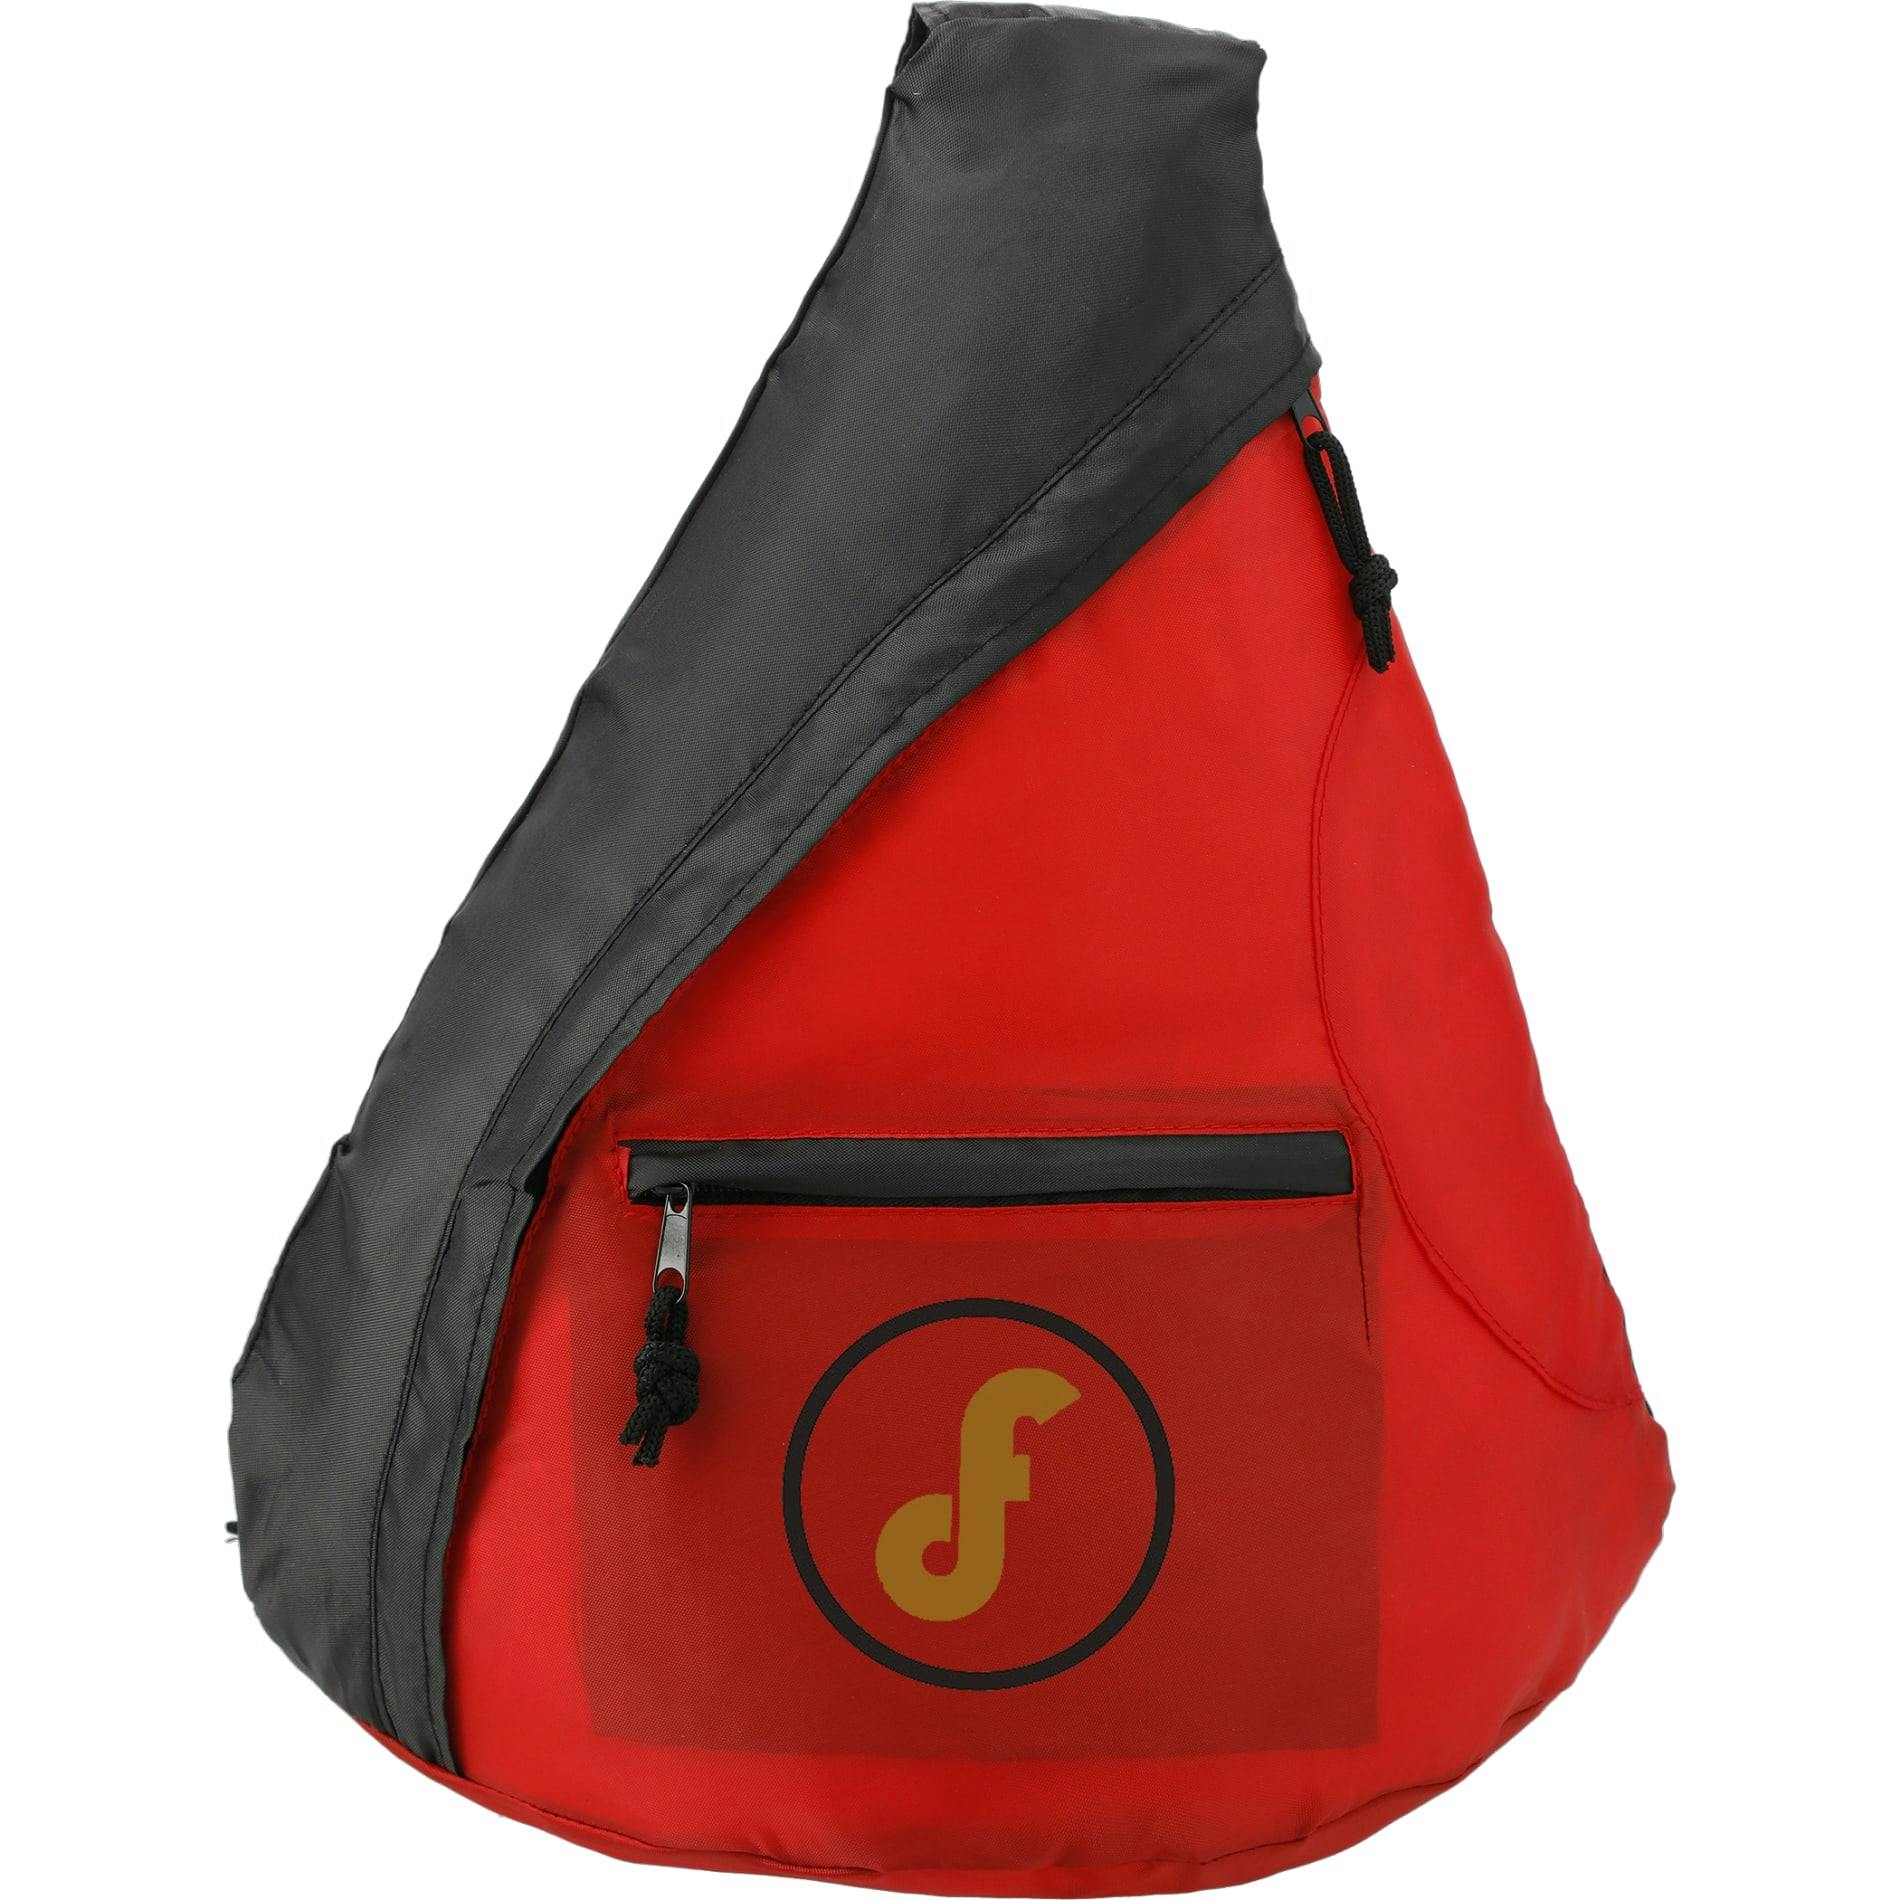 Downtown Sling Backpack - additional Image 1